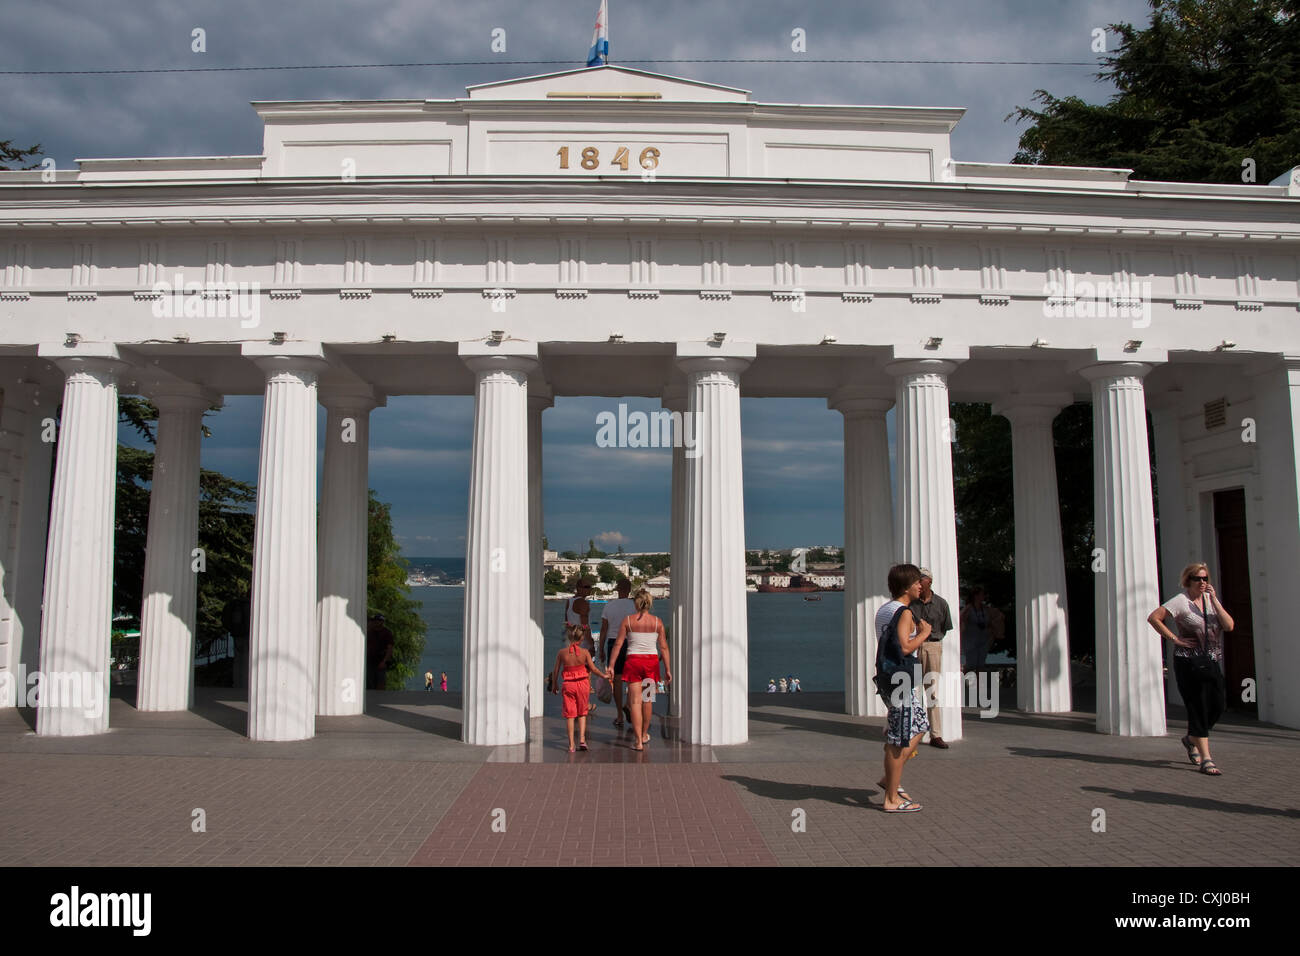 Columned entrance to Grafs Promenade on the Sevastopol waterfront. Stock Photo